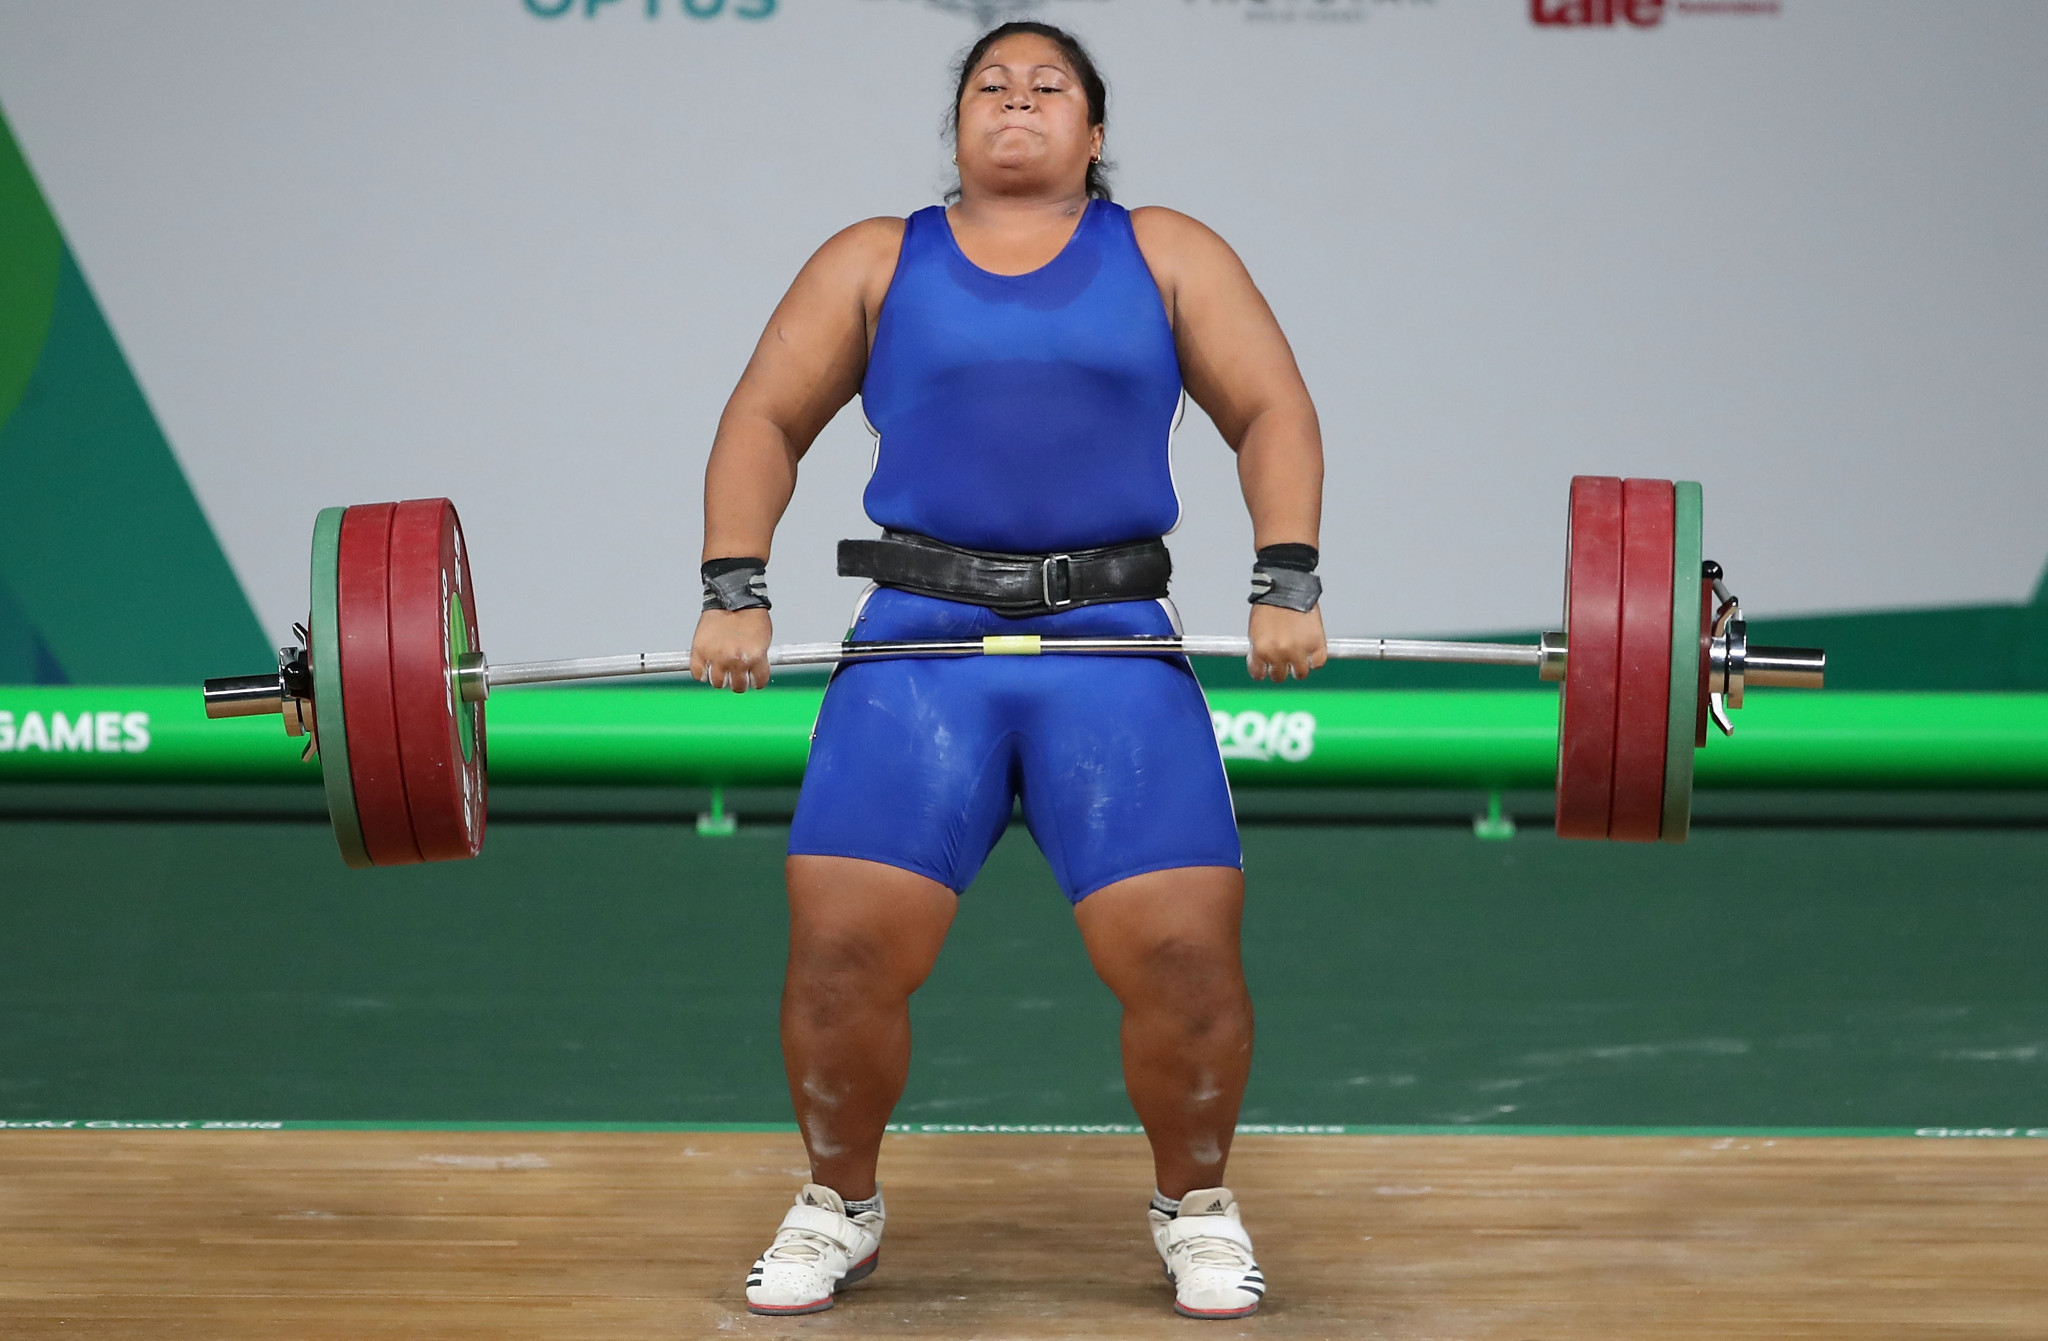 Samoa's Feagaiga Stowers was second at the 2017 Pacific Games, behind Laurel Hubbard ©Getty Images